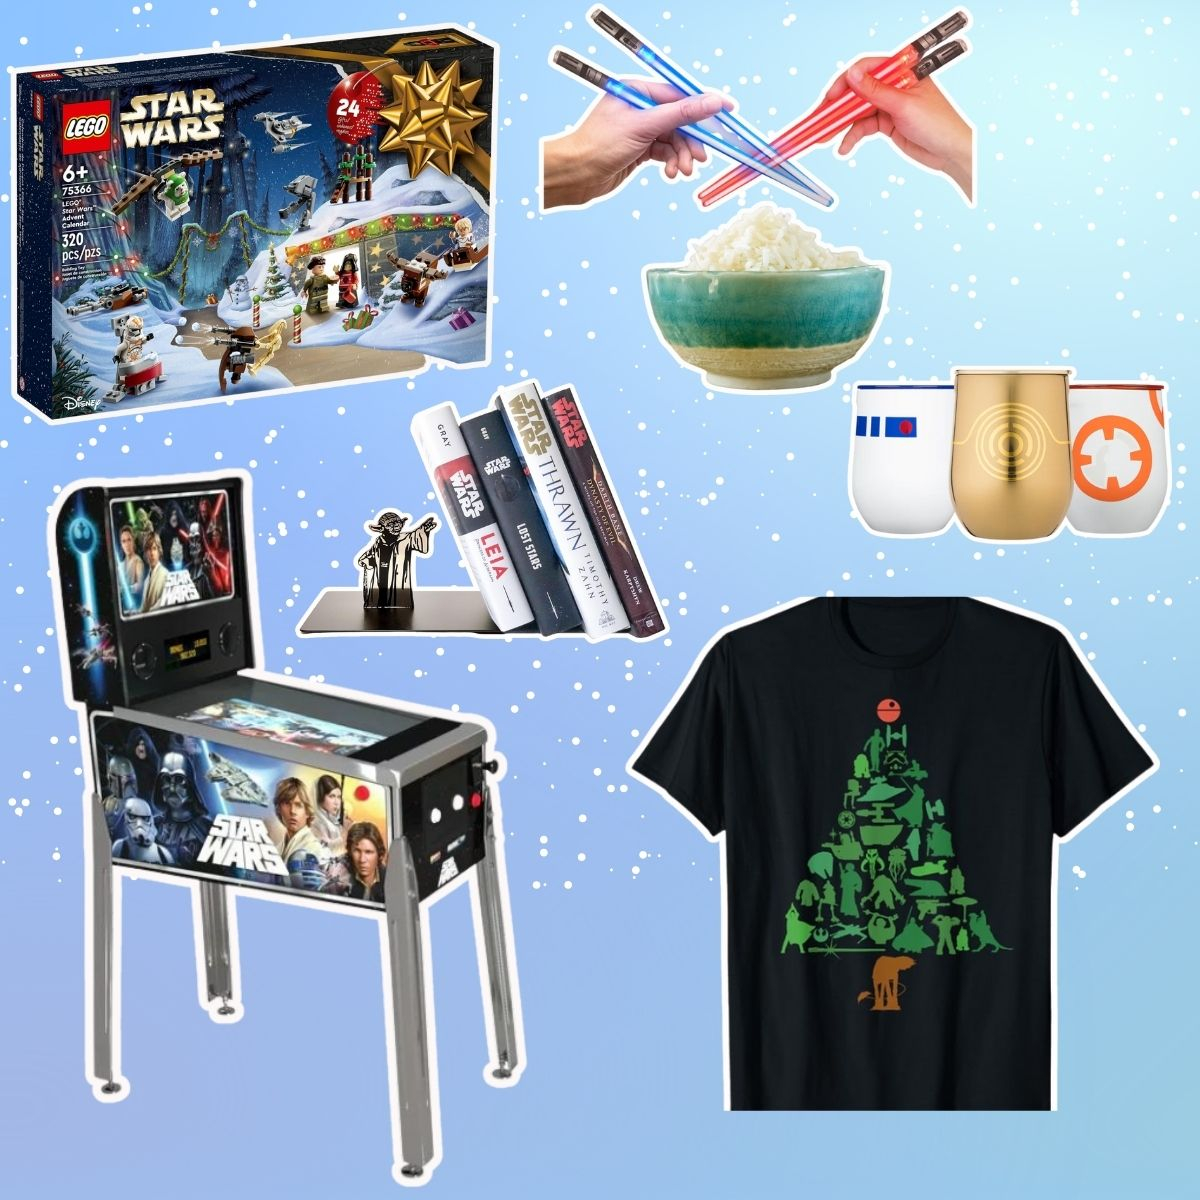 The Best Gifts For Star Trek Fans That Are Highly Logical